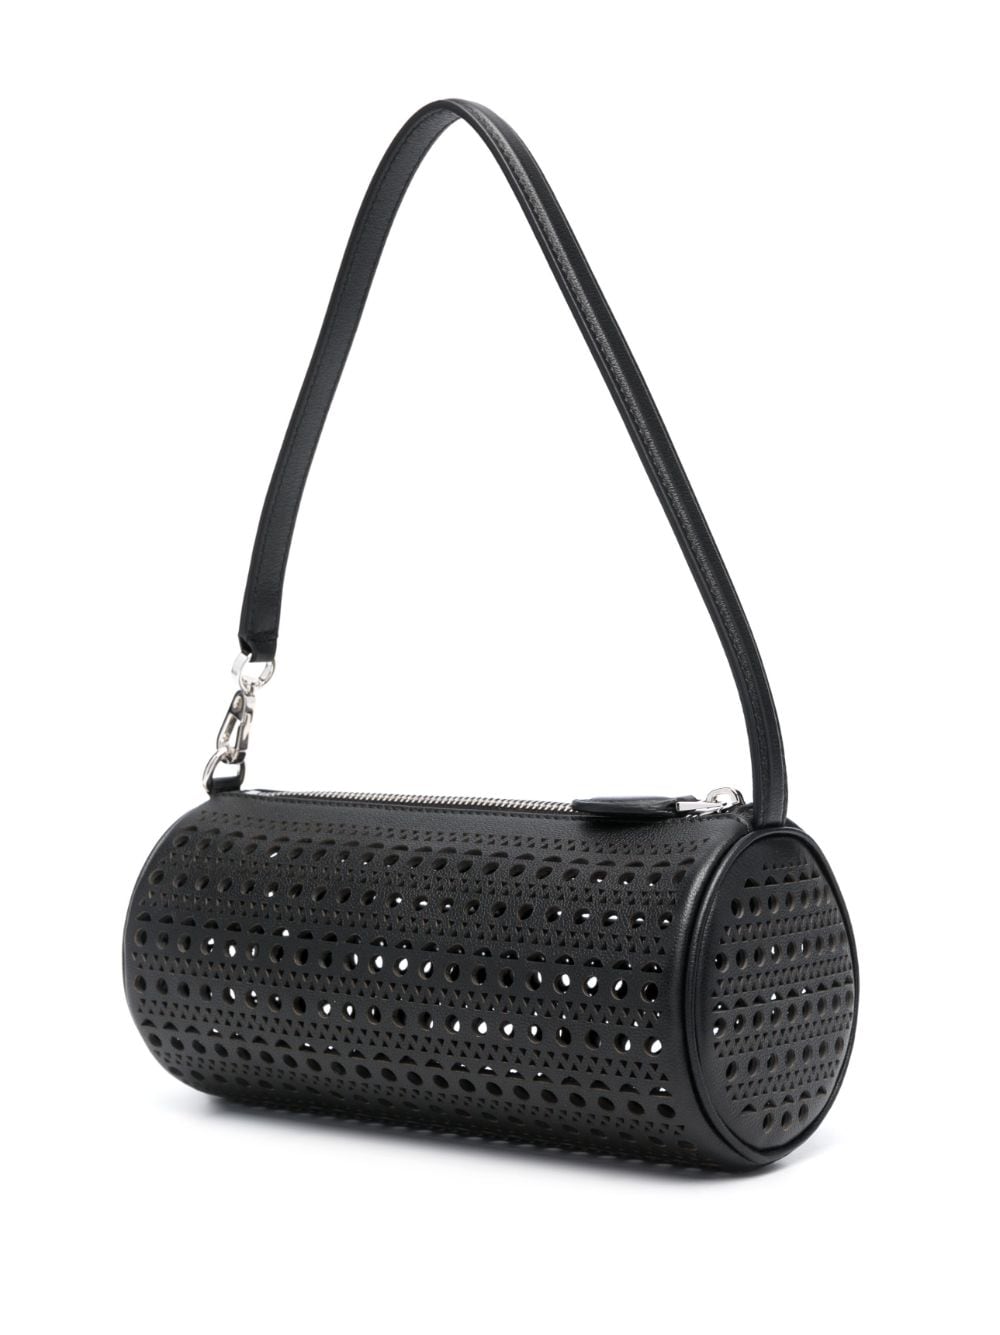 ALAIA Black Calf Leather Small Shoulder Bag with Silver-Tone Hardware and Signature Vienne Pattern for Women